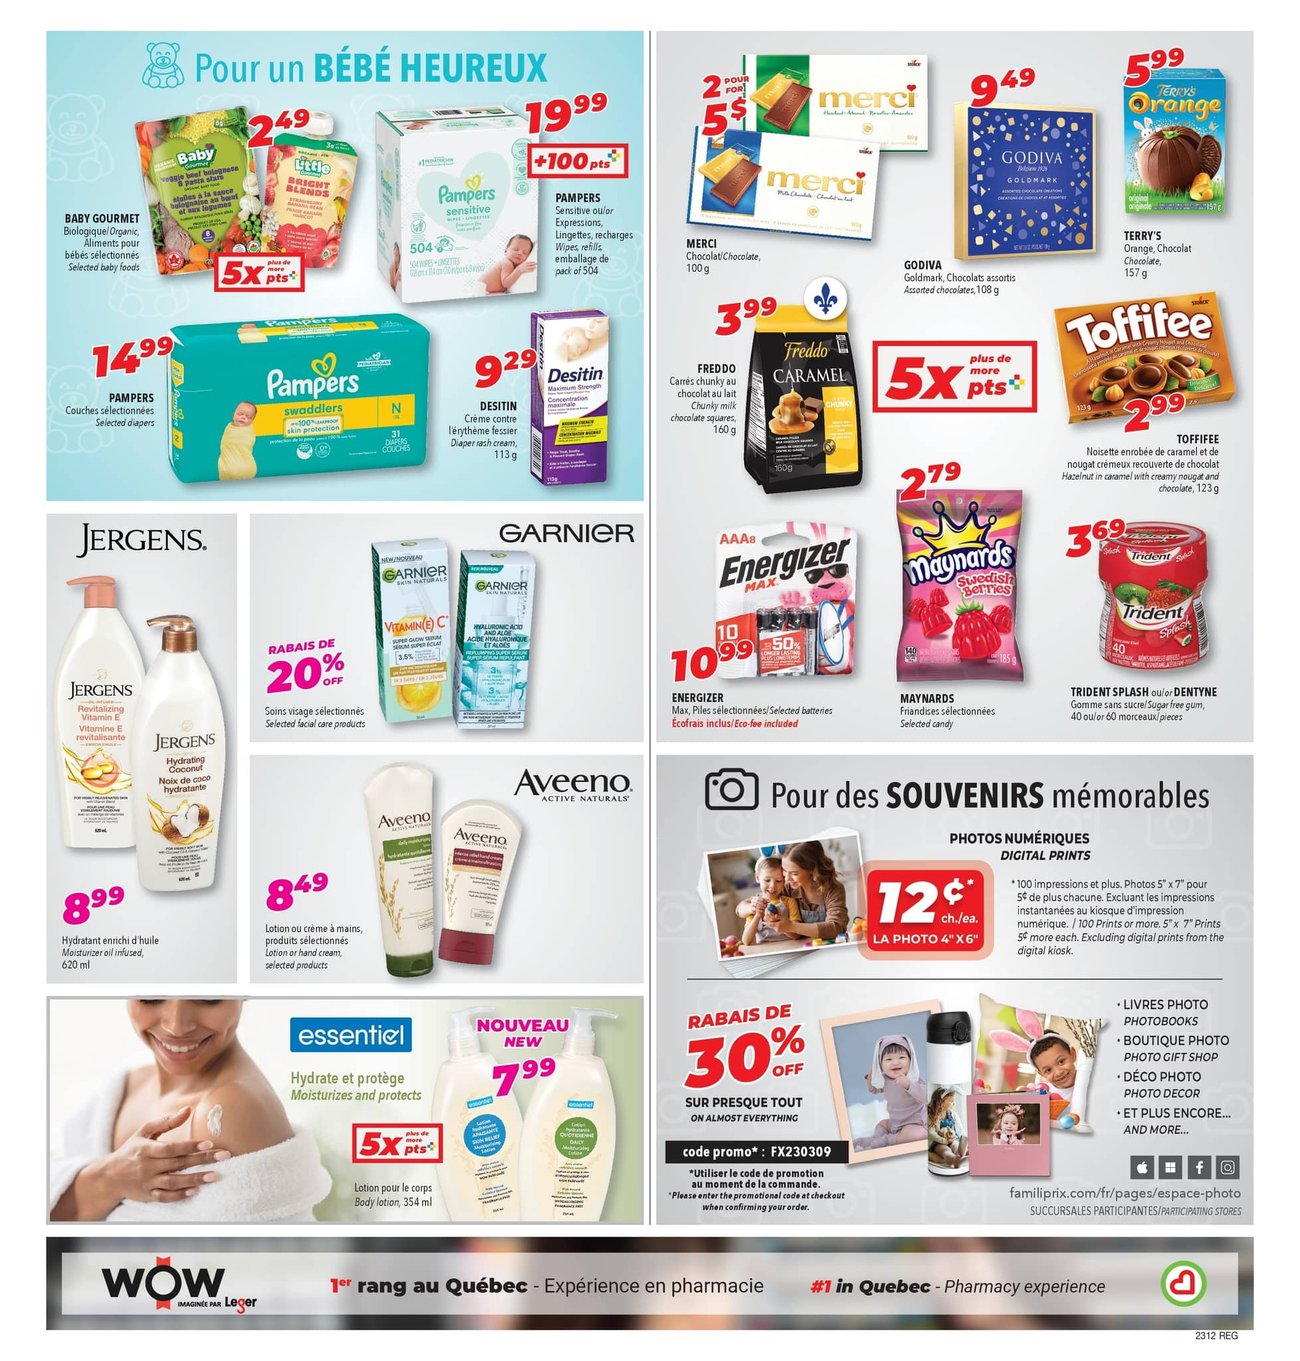 Familiprix - Weekly Flyer Specials - Page 16